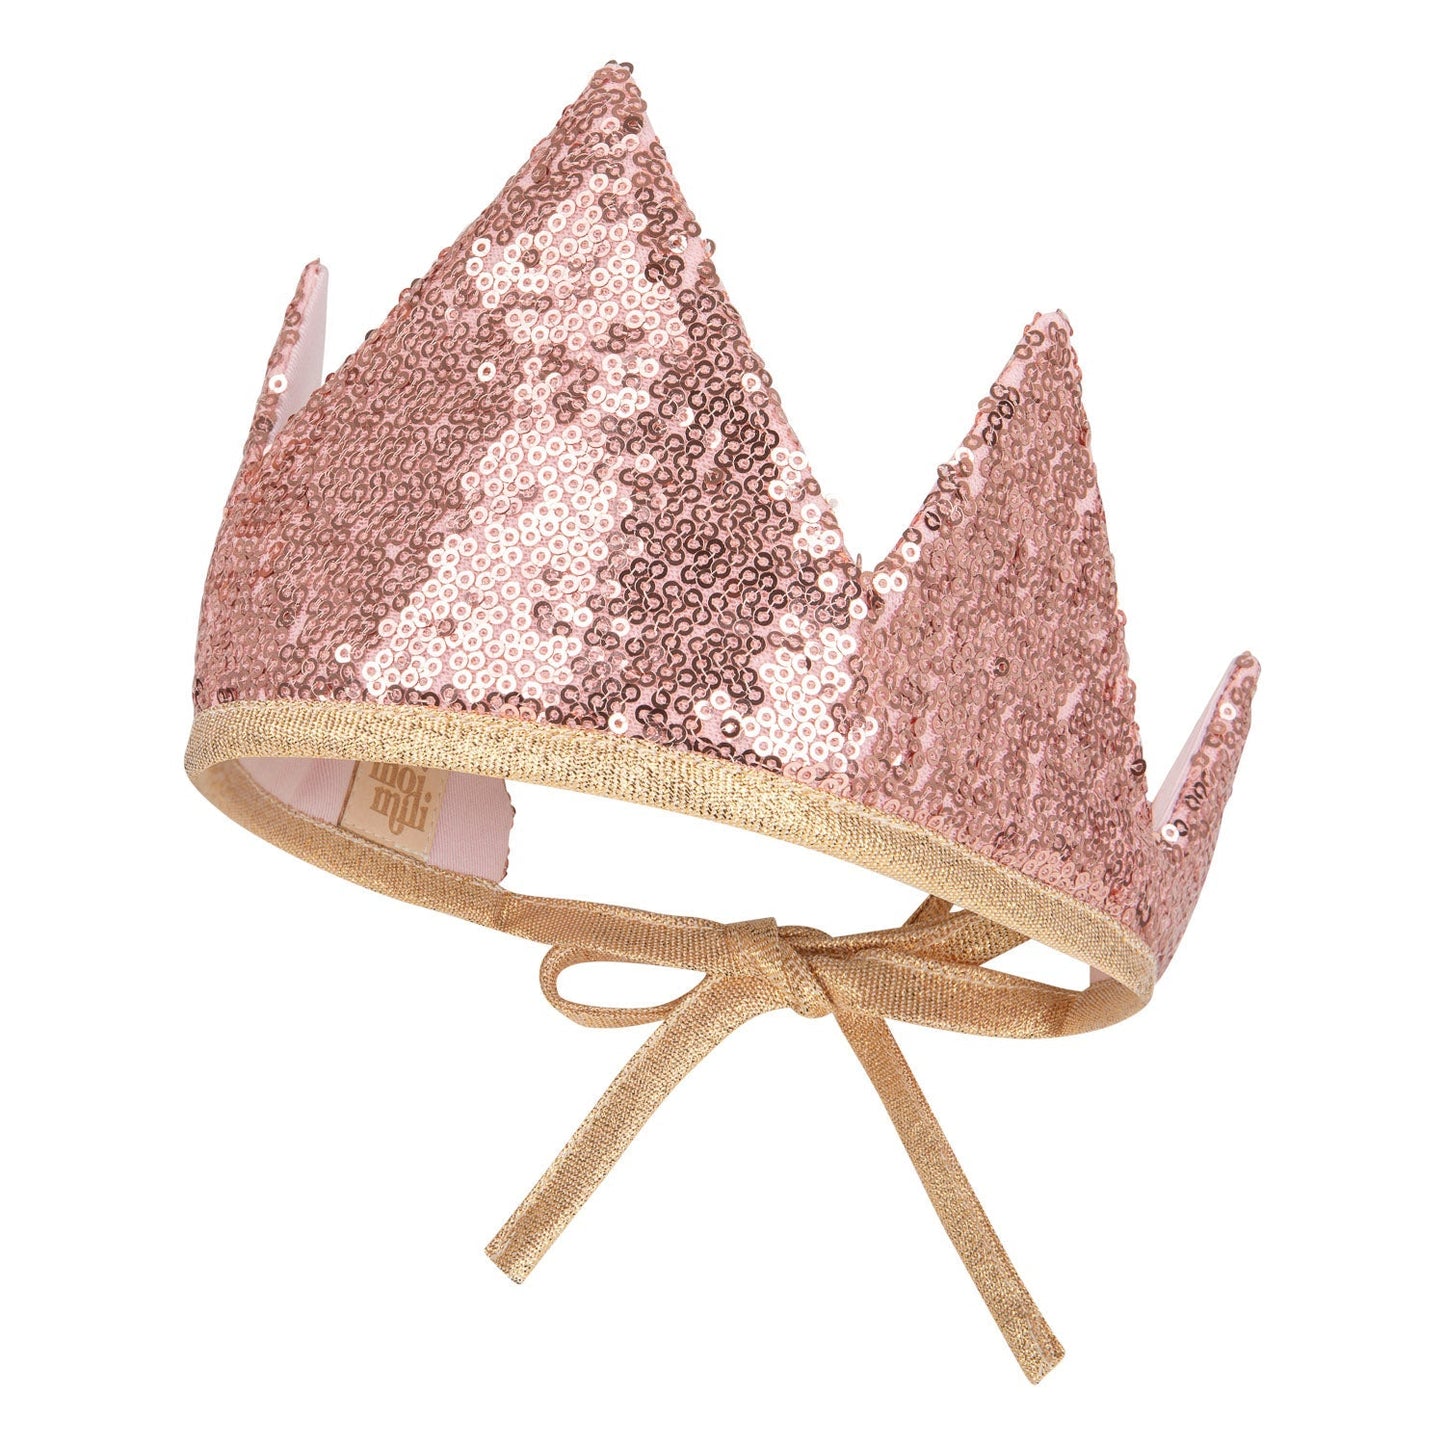 “Pink Sequins” Crown and Wand Magic Set by Moi Mili